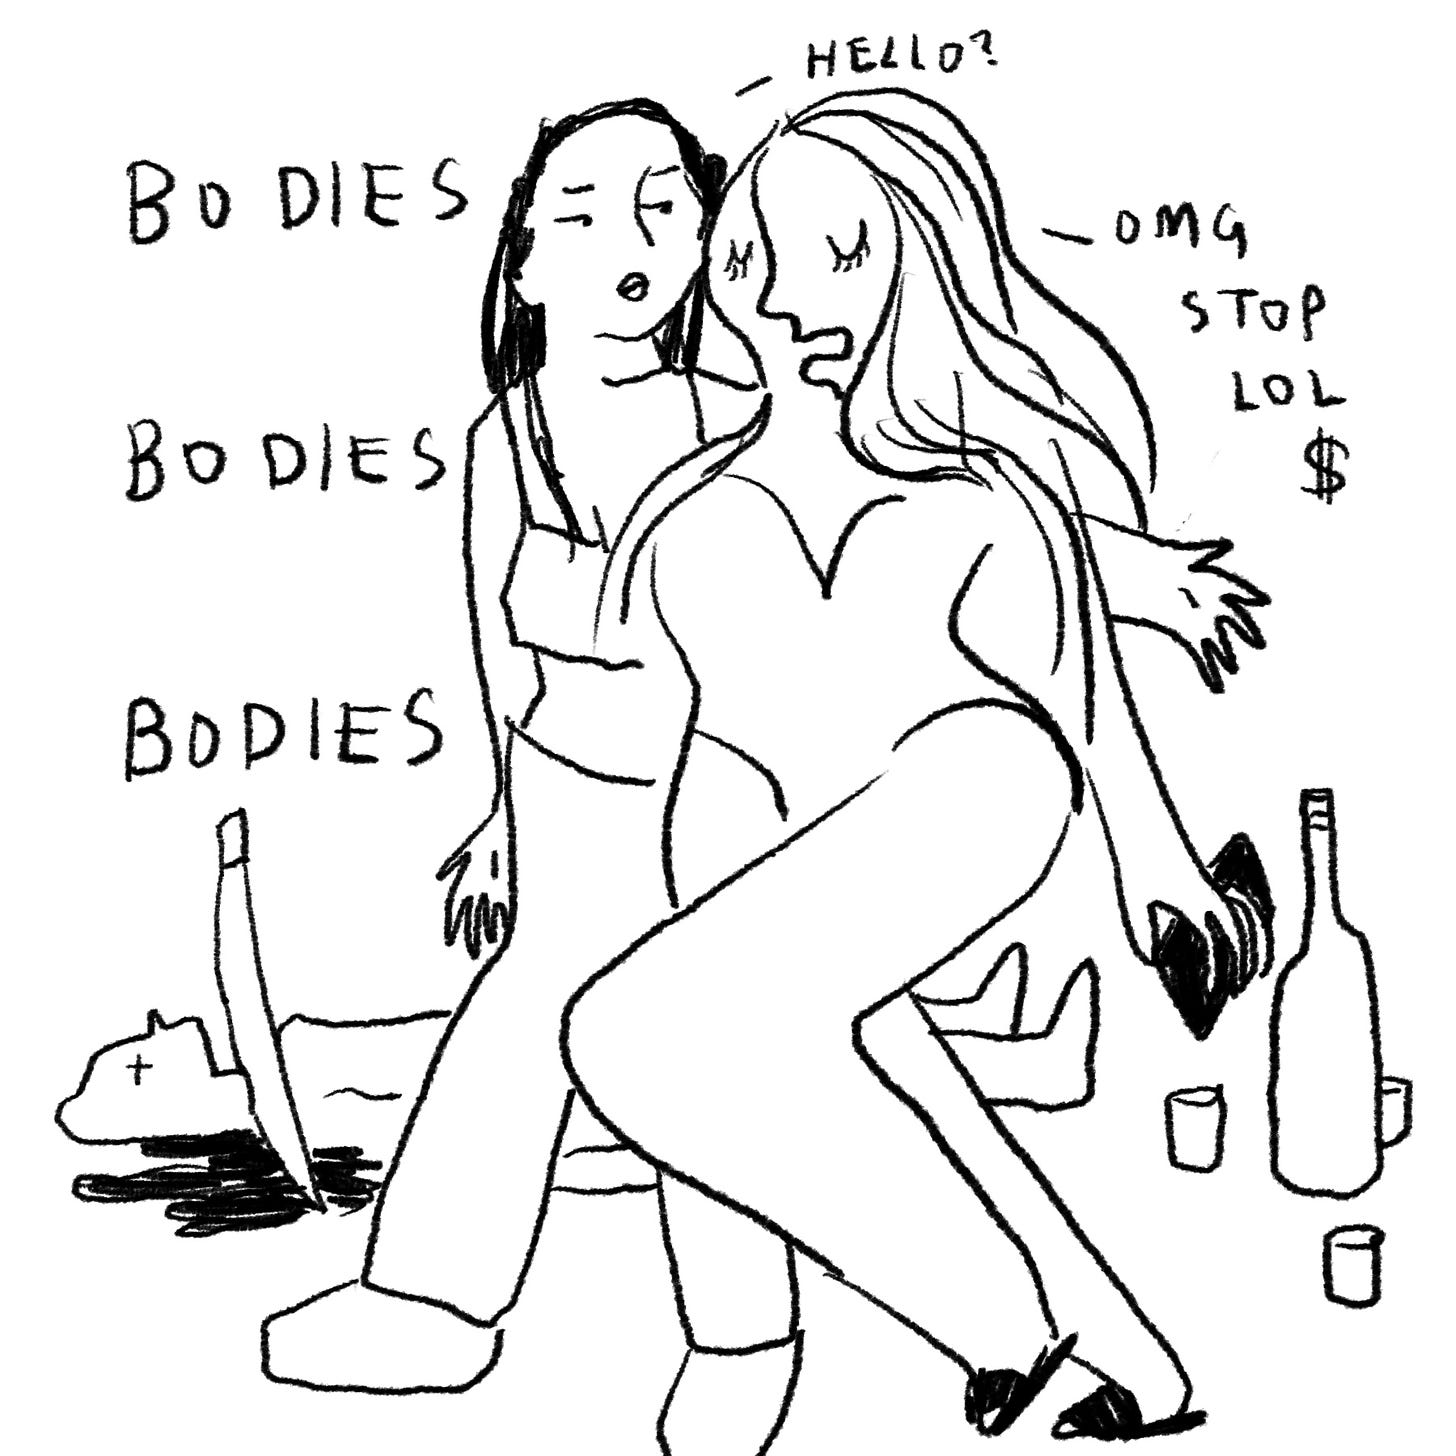 Silly BW fan art of characters from BODIES BODIES BODIES.